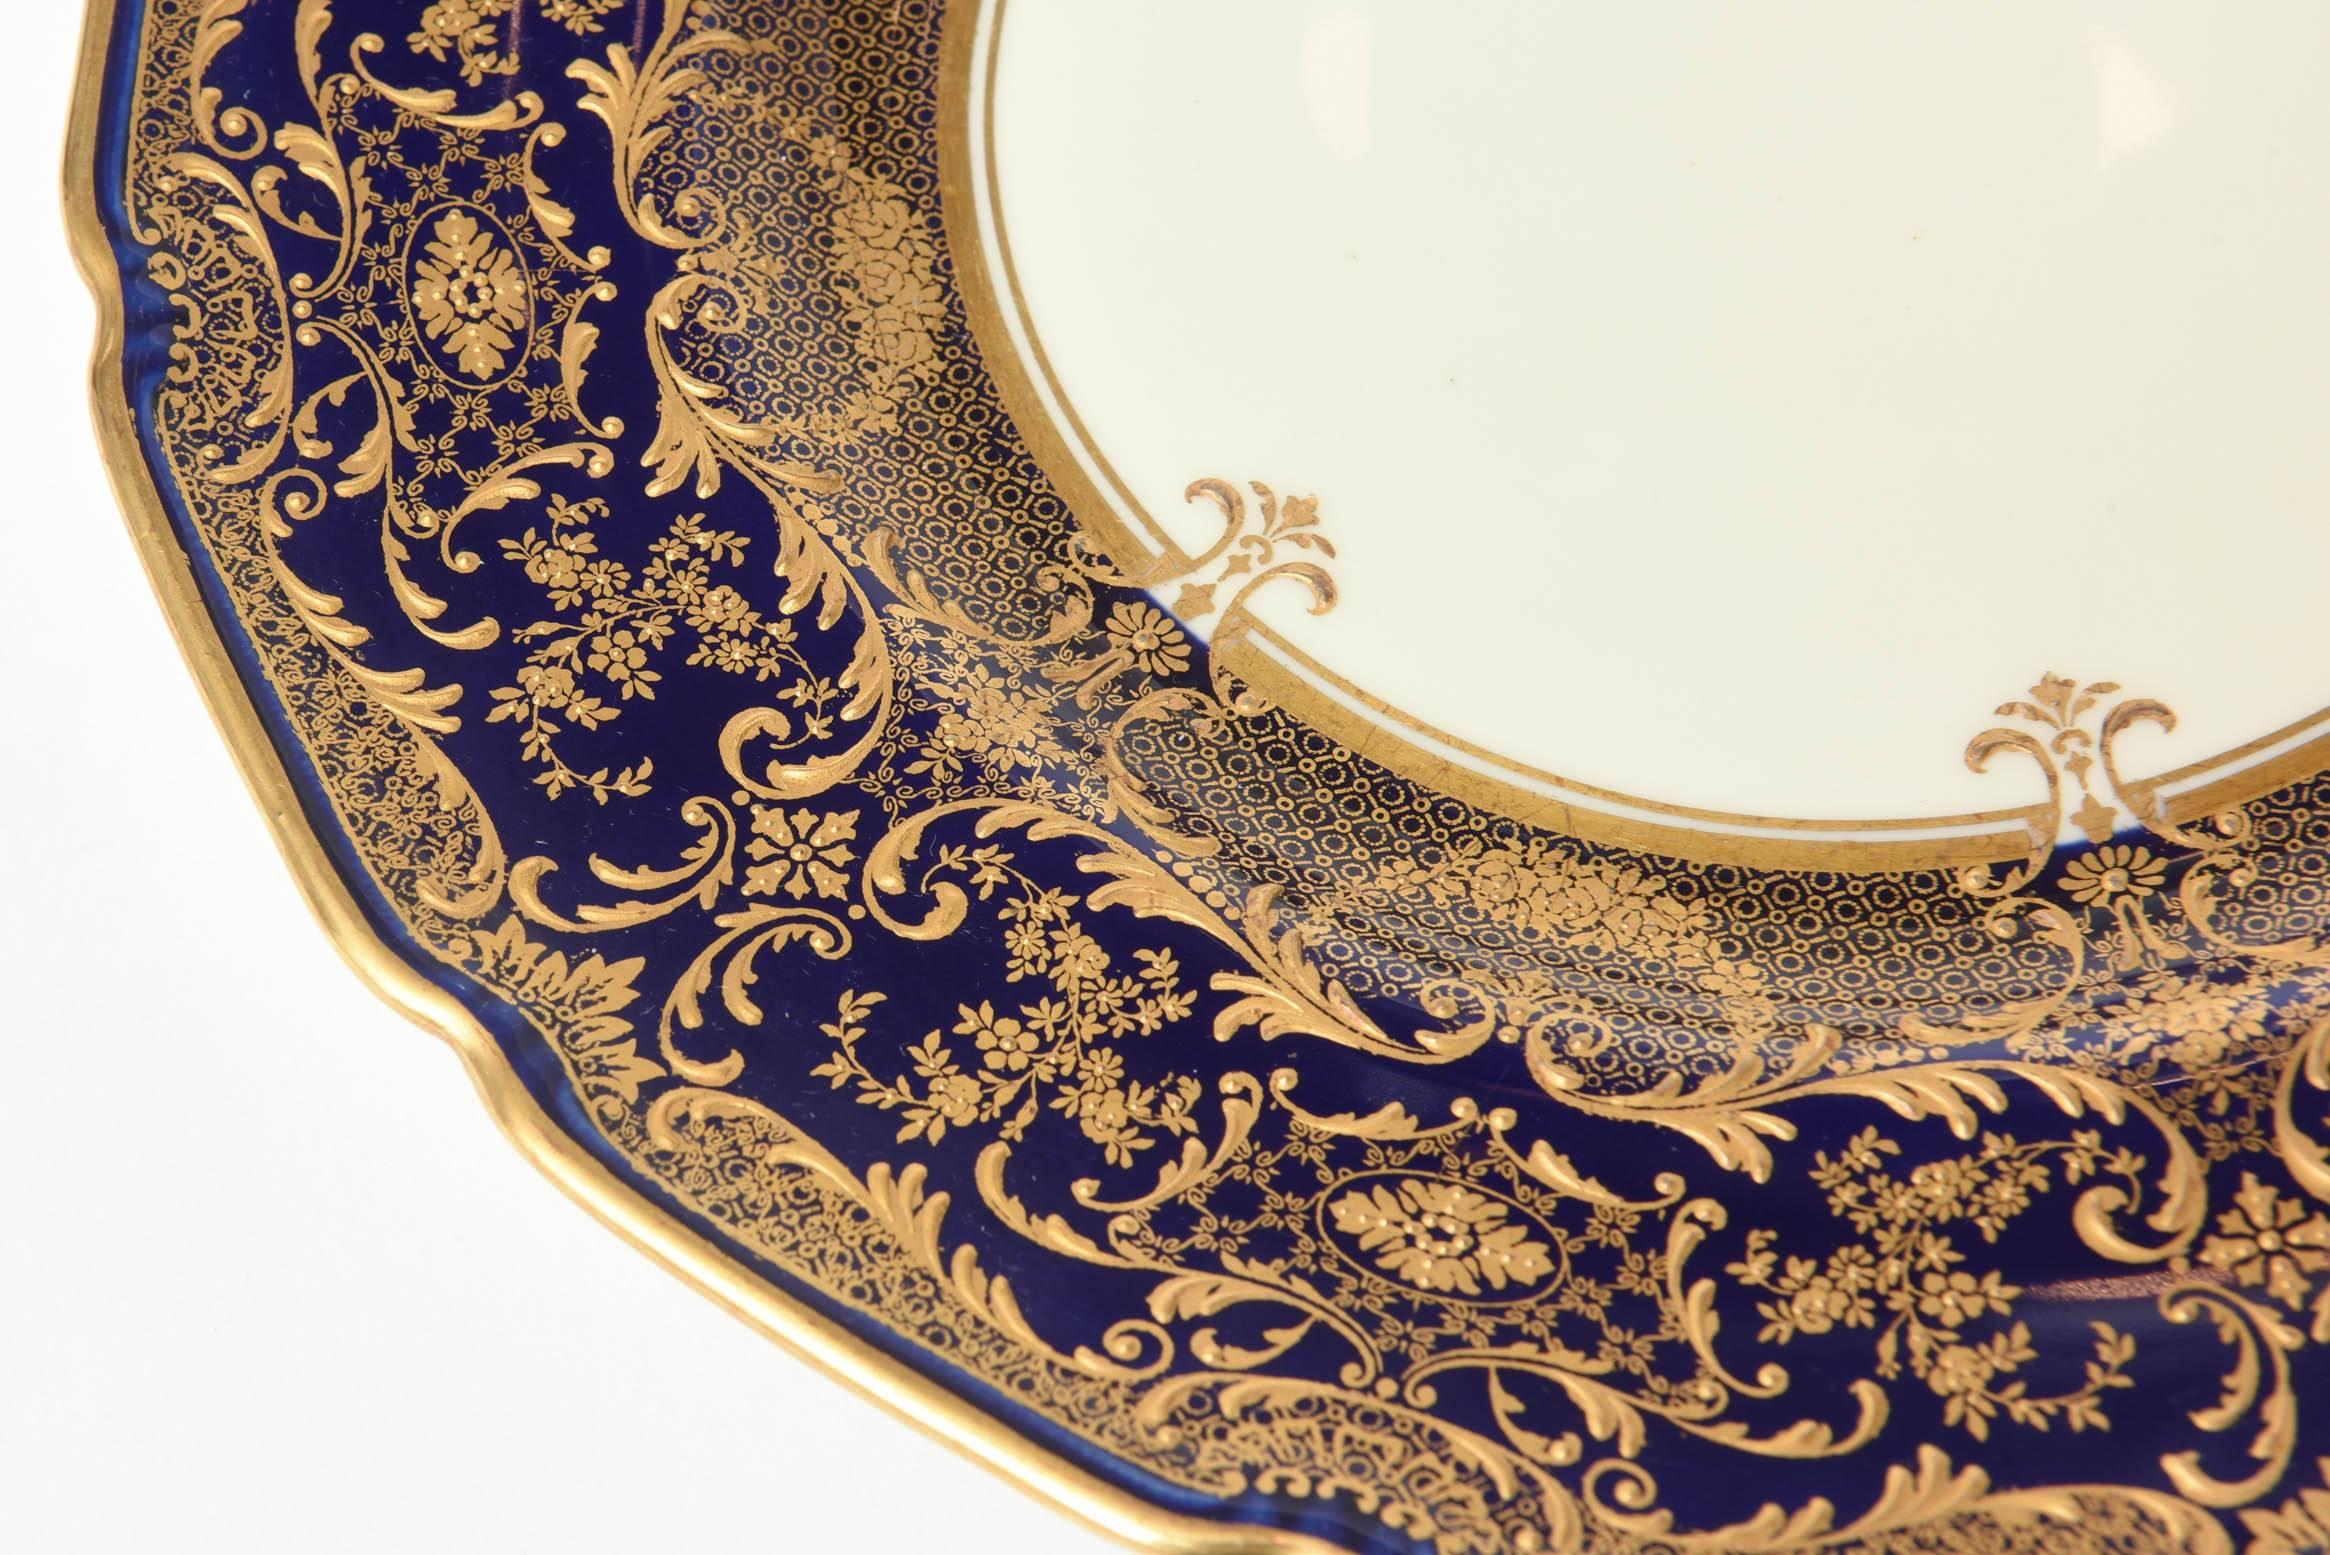 American 12 Exquisite and Elaborate Cobalt Blue and Gilt Dessert or Salad Plates